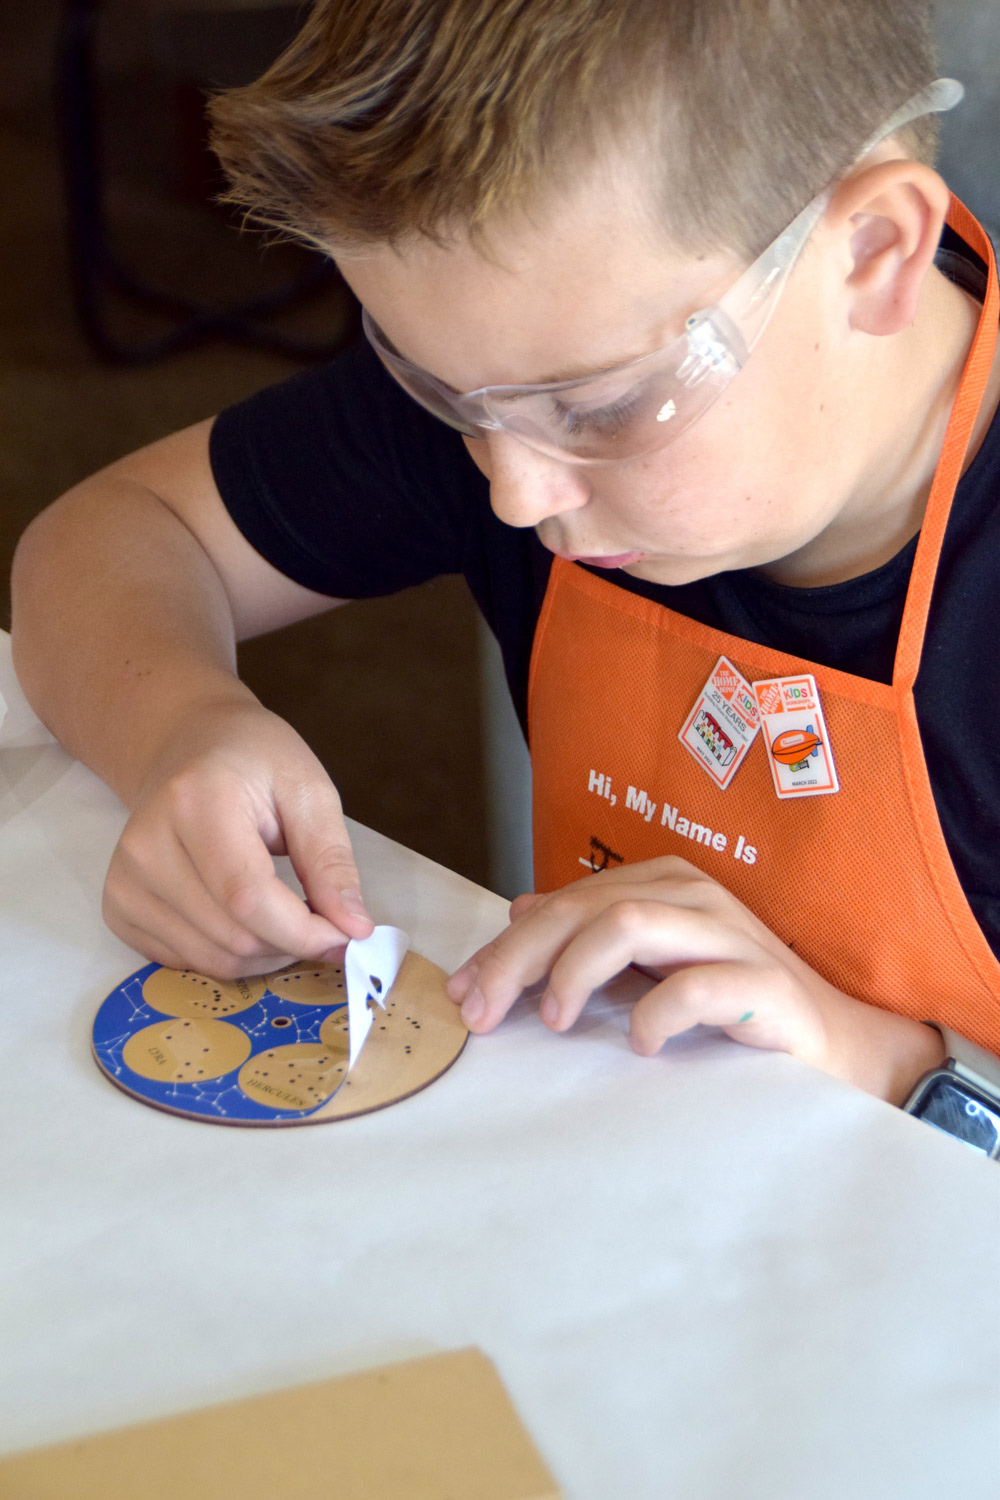 Boy placing a constellation sticker on top of a disk.